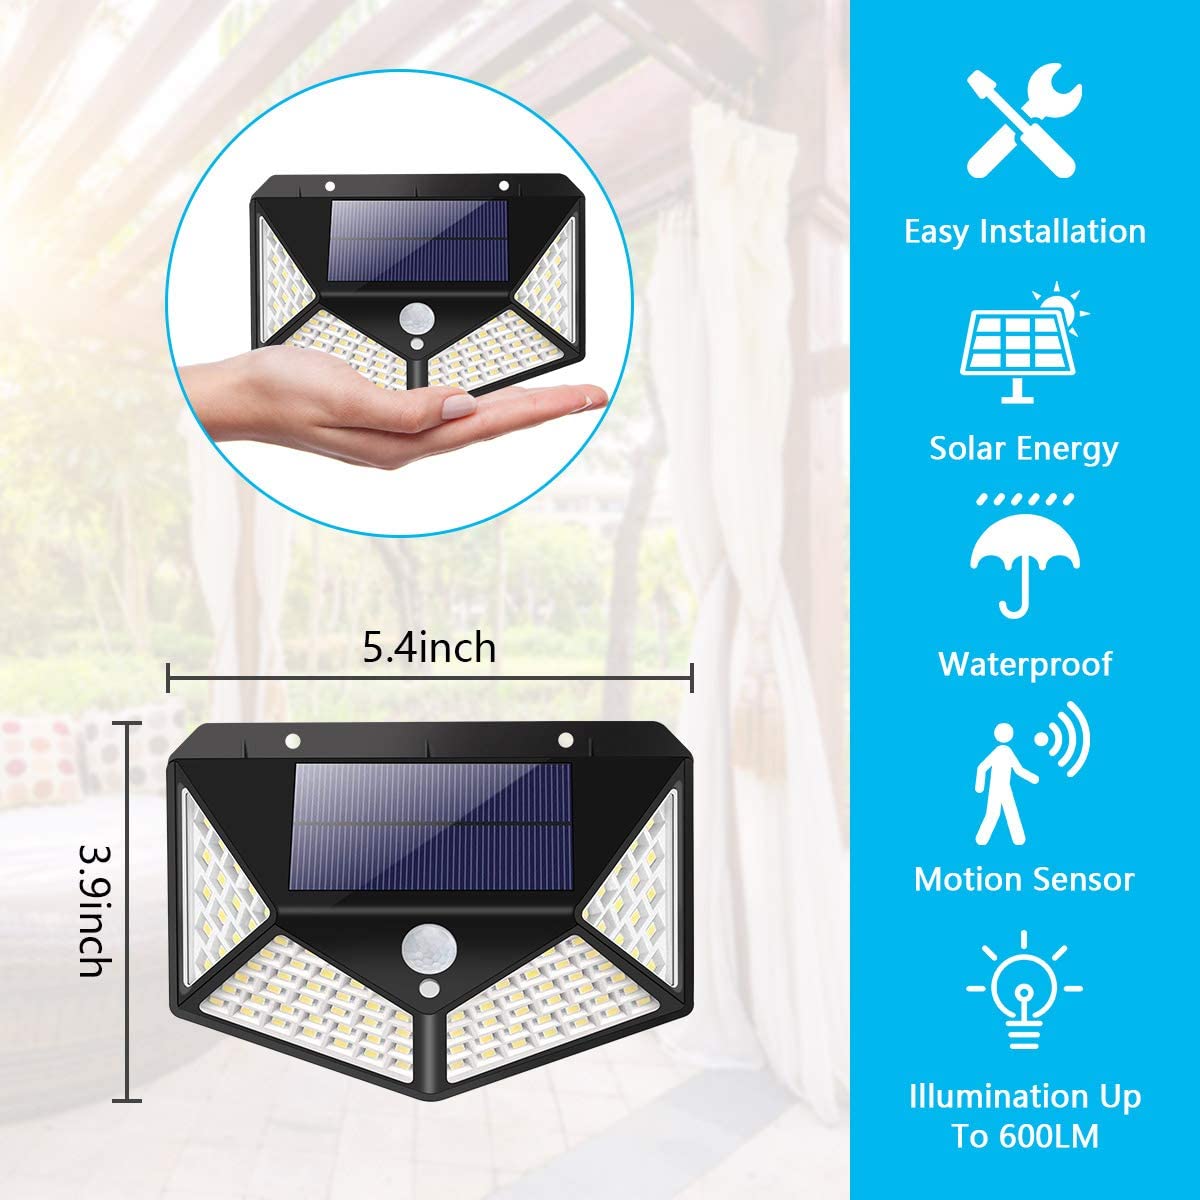 Solar Lights Outdoor, Solar Powered Motion Sensor Lights 100 LEDs Outdoor Waterproof Wall Light Night Light with 3 Modes with 270° Wide Angle for Garden, Patio Yard, Deck Garage, Fence - 1 Pack - image 2 of 8